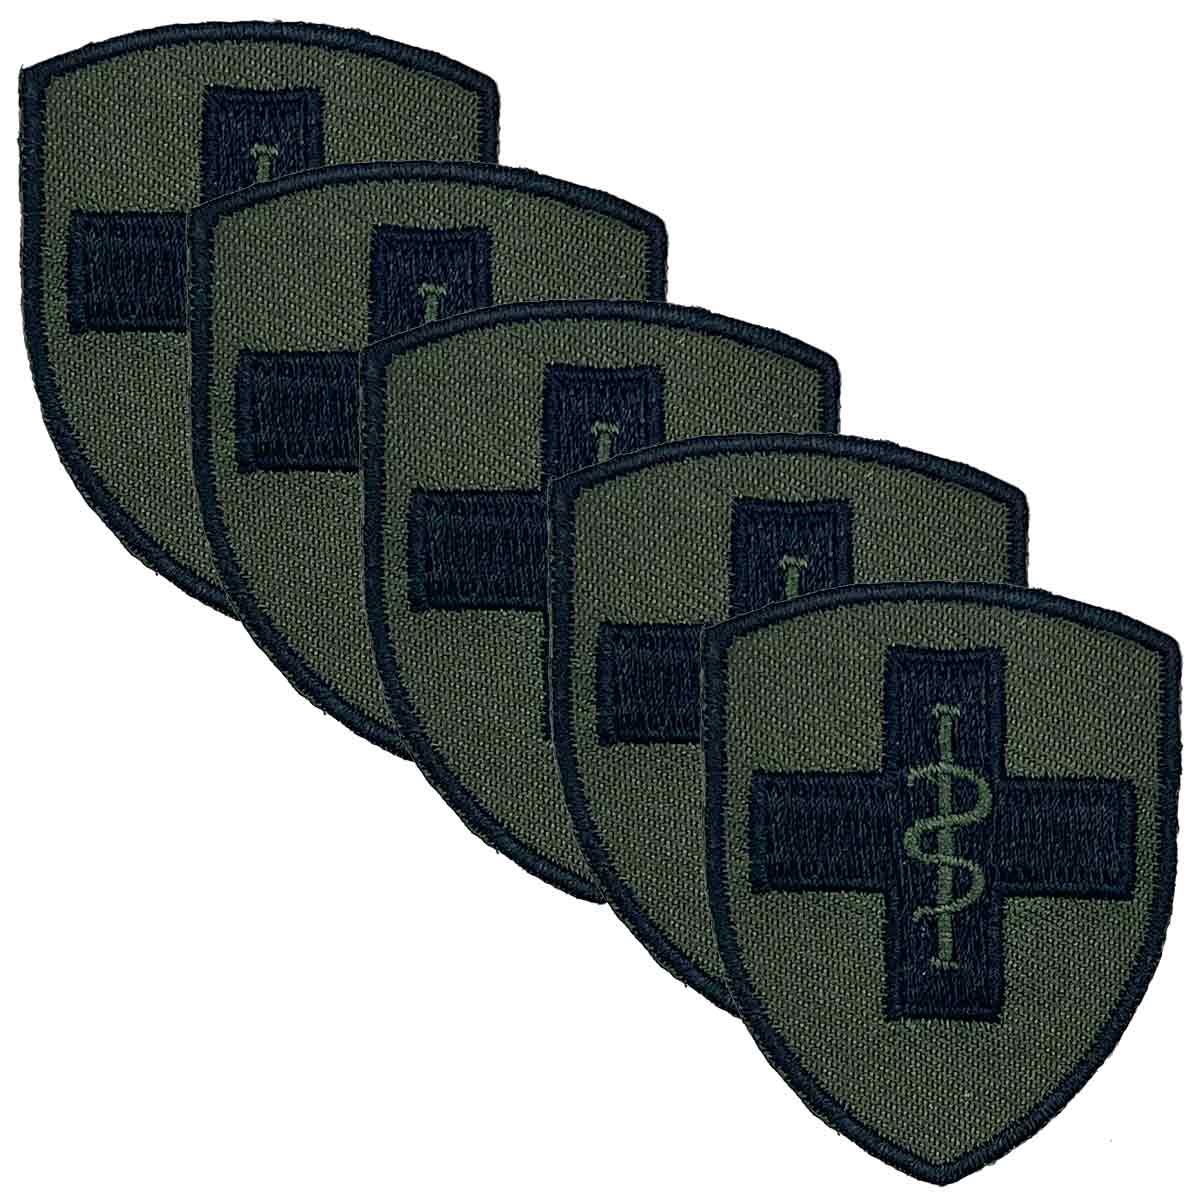 2 Medical Brigade TRF - Iron or Sewn On Patch - John Bull Clothing